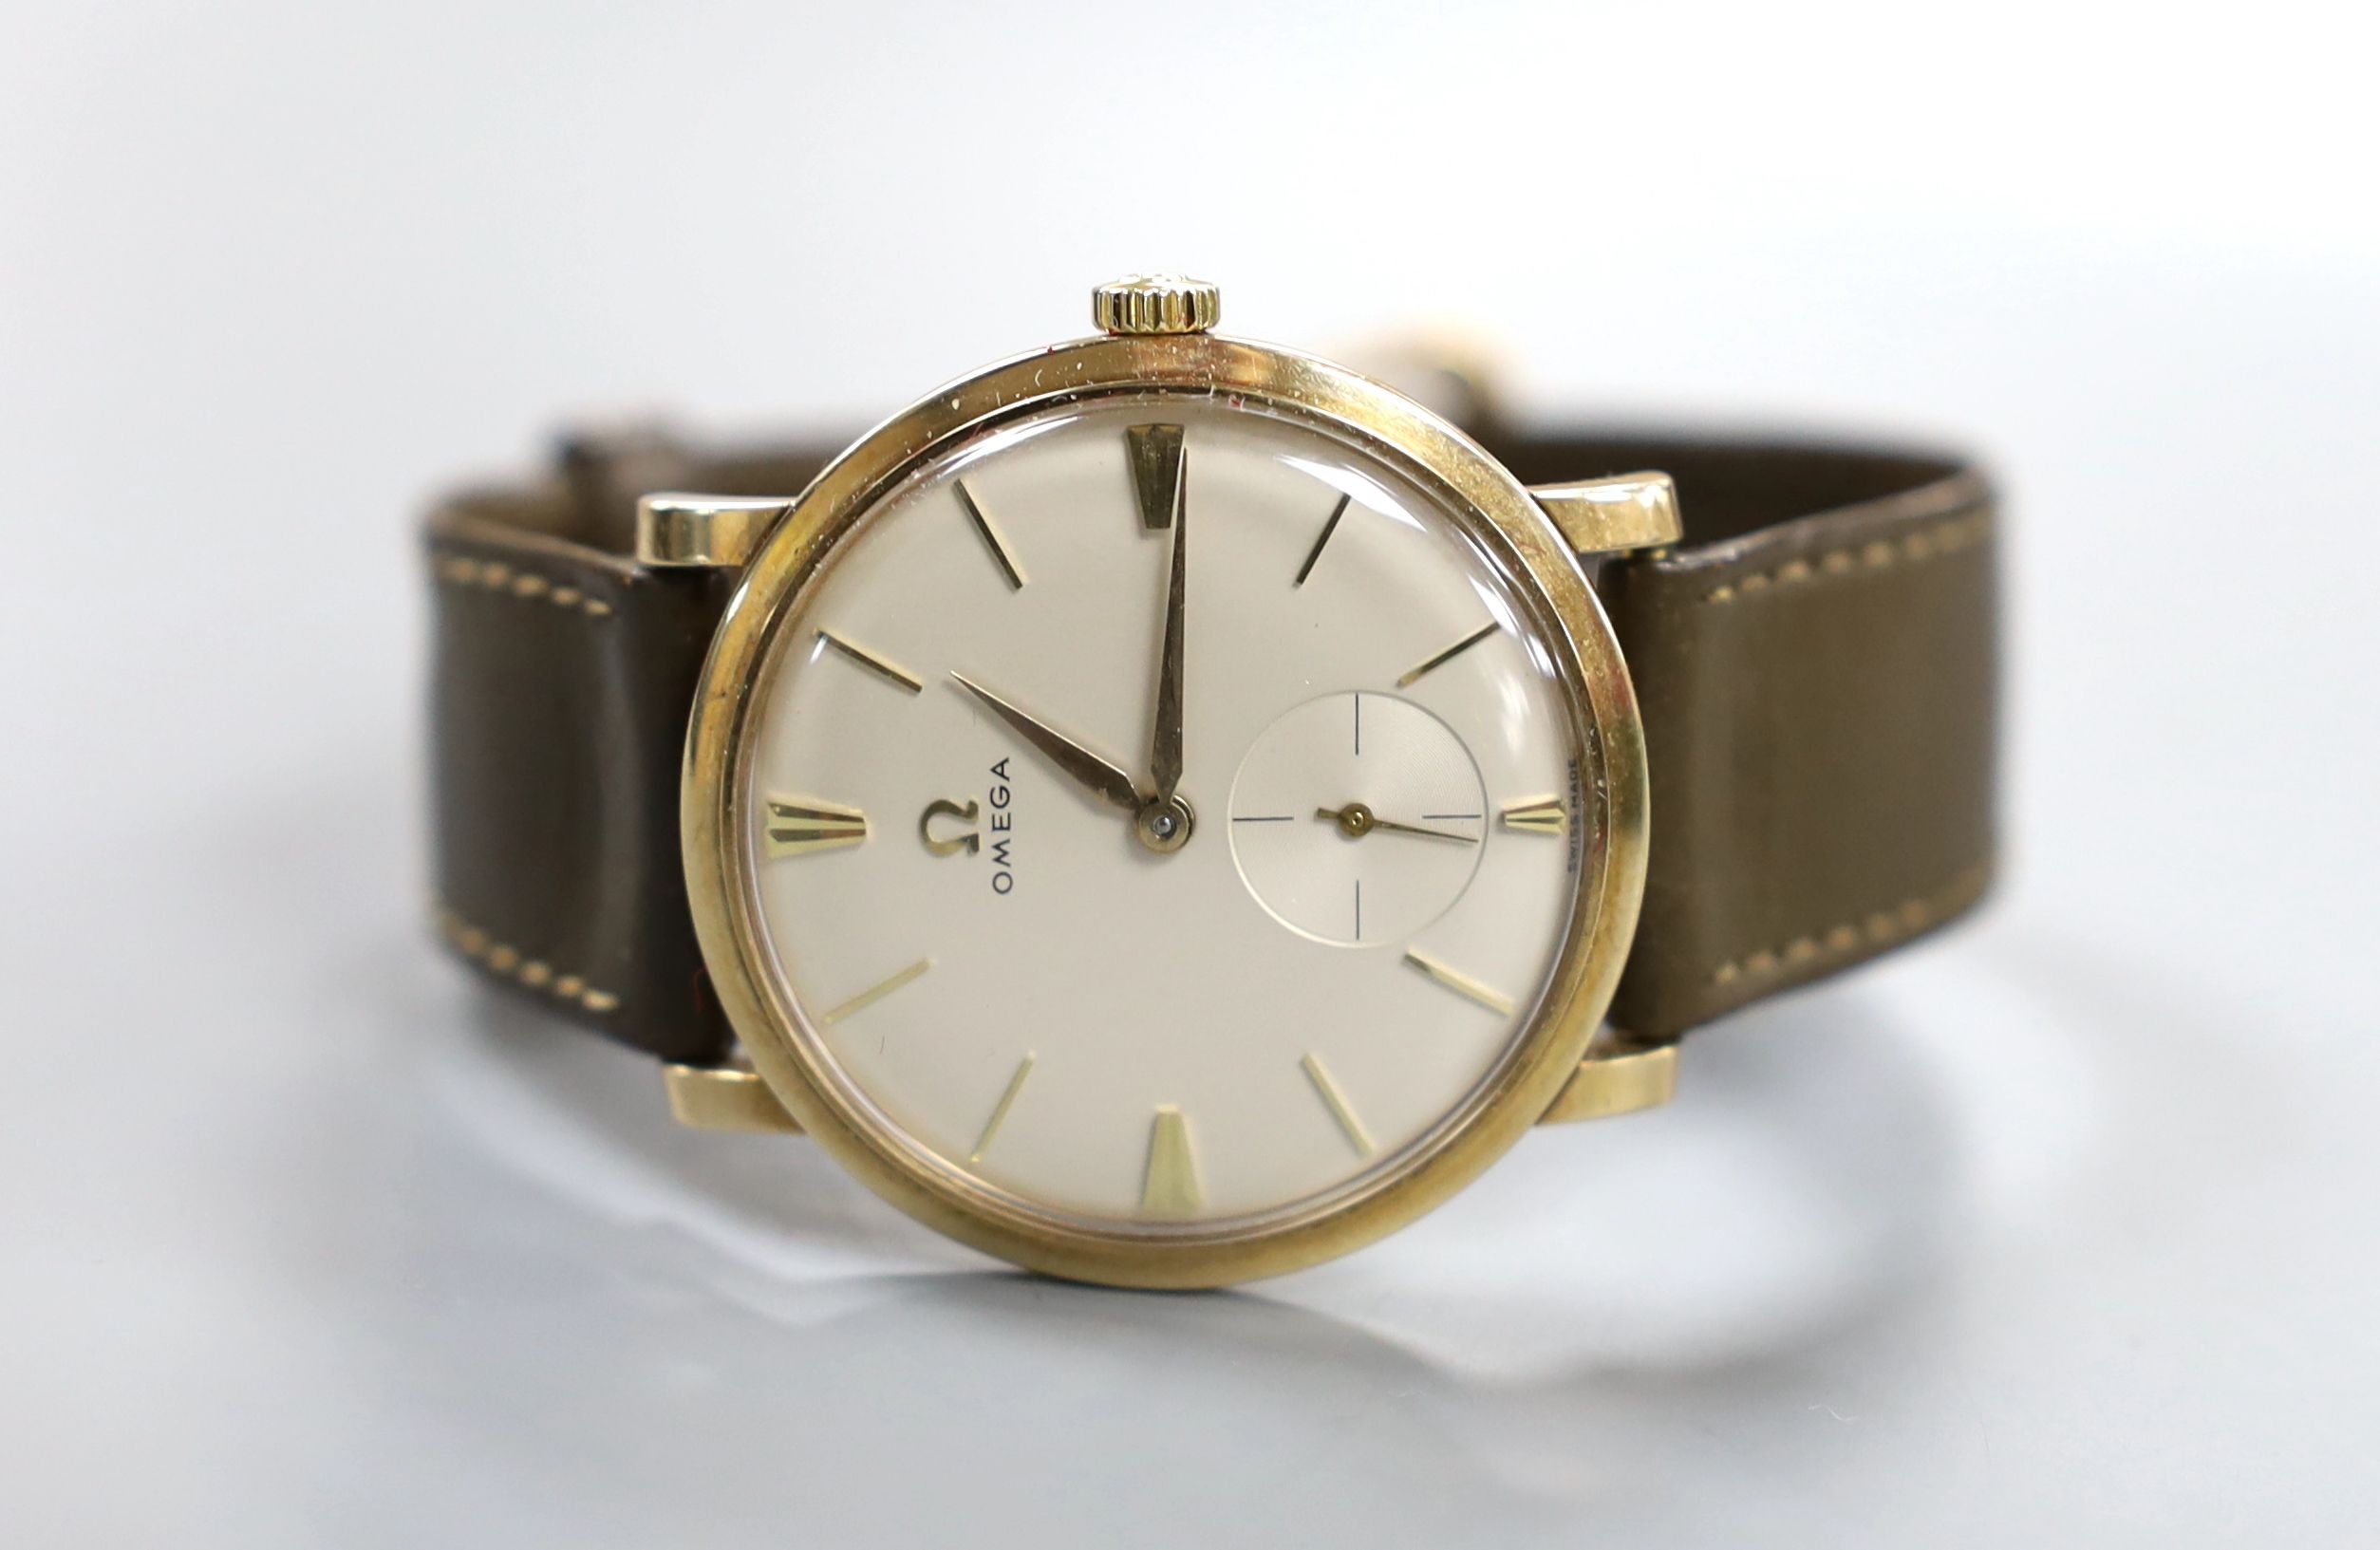 A gentlemen's late 1950's 9ct gold Omega manual wind wristwatch, on Omega leather strap with 9ct gold buckle, cased diameter 34mm, gross weight 30 grams, with Omega box.